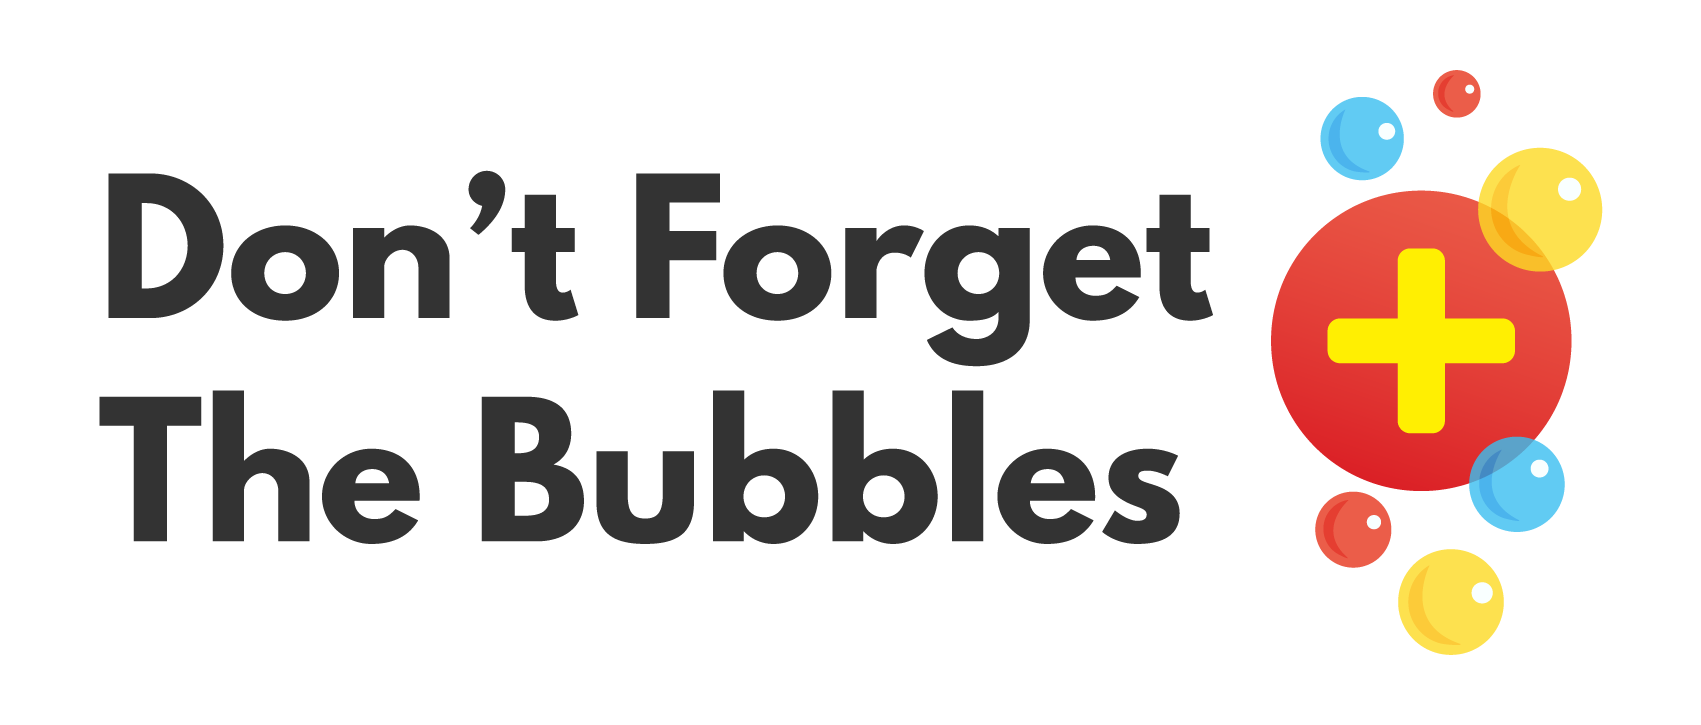 Don't Forget The Bubbles logo